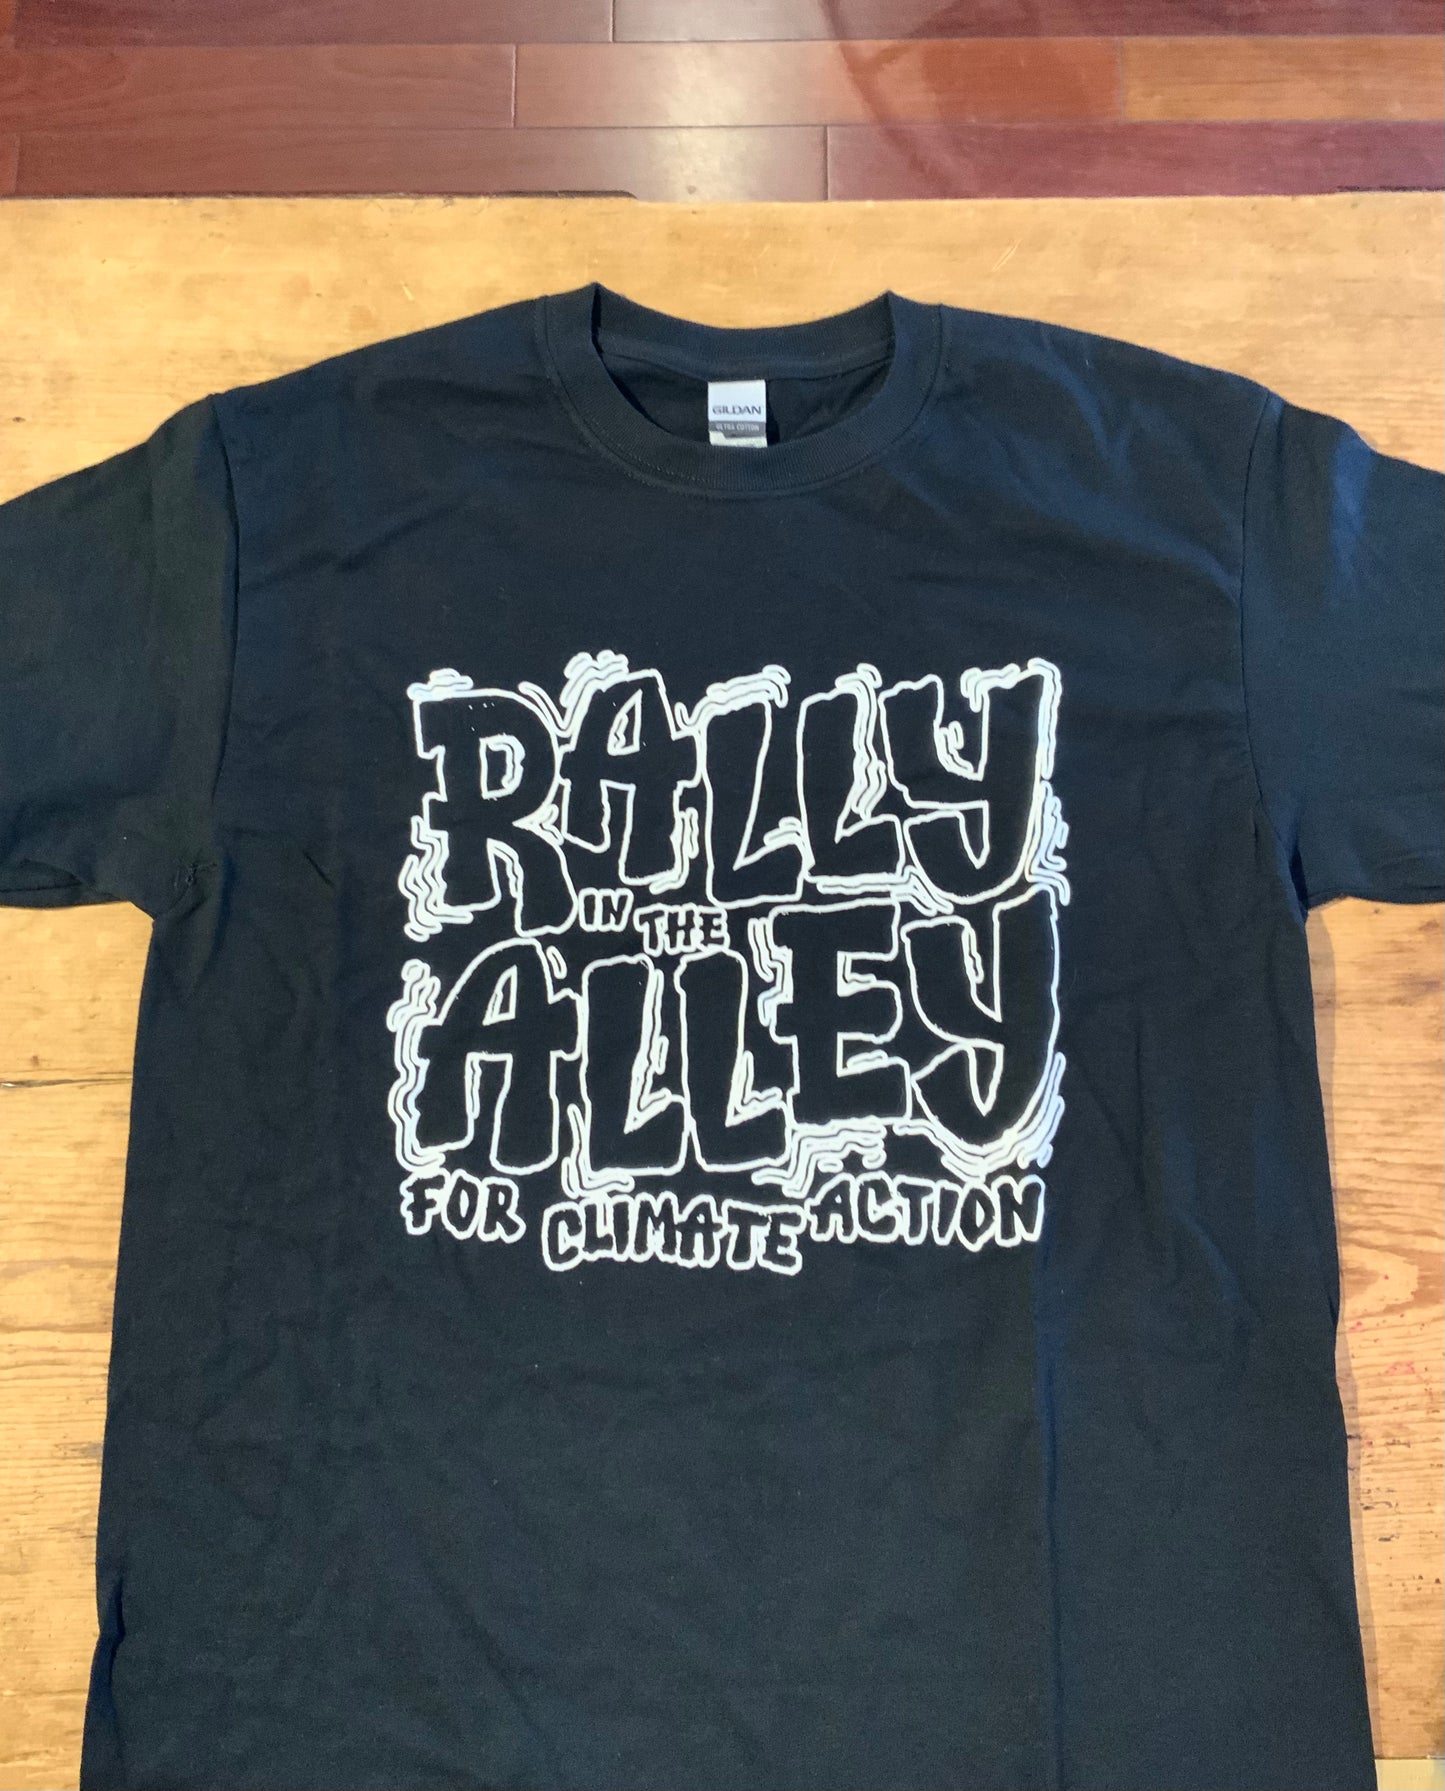 Rally in the Alley T-Shirts